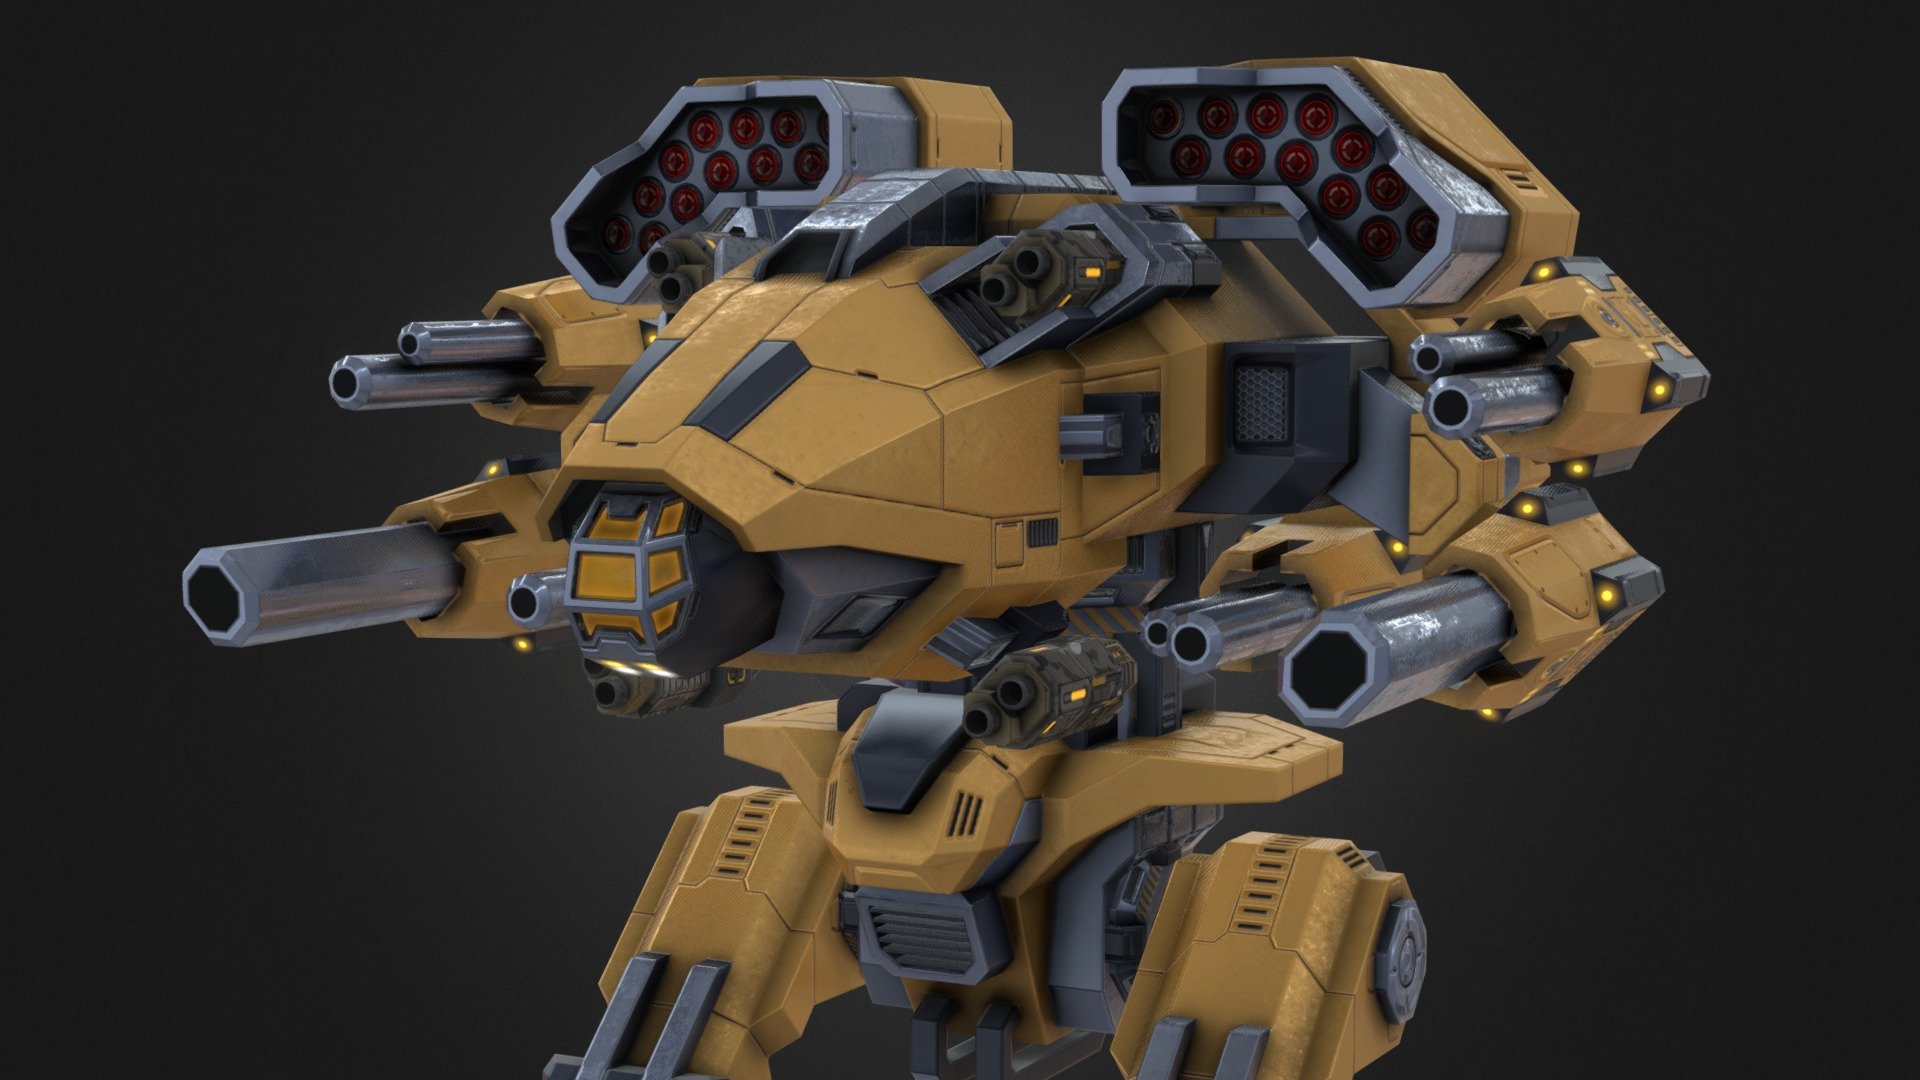 Vulture is one of battle mech project which contains various mechs and individual weapon sets. It is designed as Low-Poly for mobile games.

Weapons:




2 Missile pods

4 Modular Lasers

2 Medium Lasers

2 Large Lasers

Animations:




walk

Textures: 

All the textures have 4k resolution and created with PBR workflow




Albedo

Normal

MetalicSmoothness

Emissive

Roughness
 - Vulture - Lowpoly Animated Mech - Buy Royalty Free 3D model by OP3D (@scifi3d) 3d model